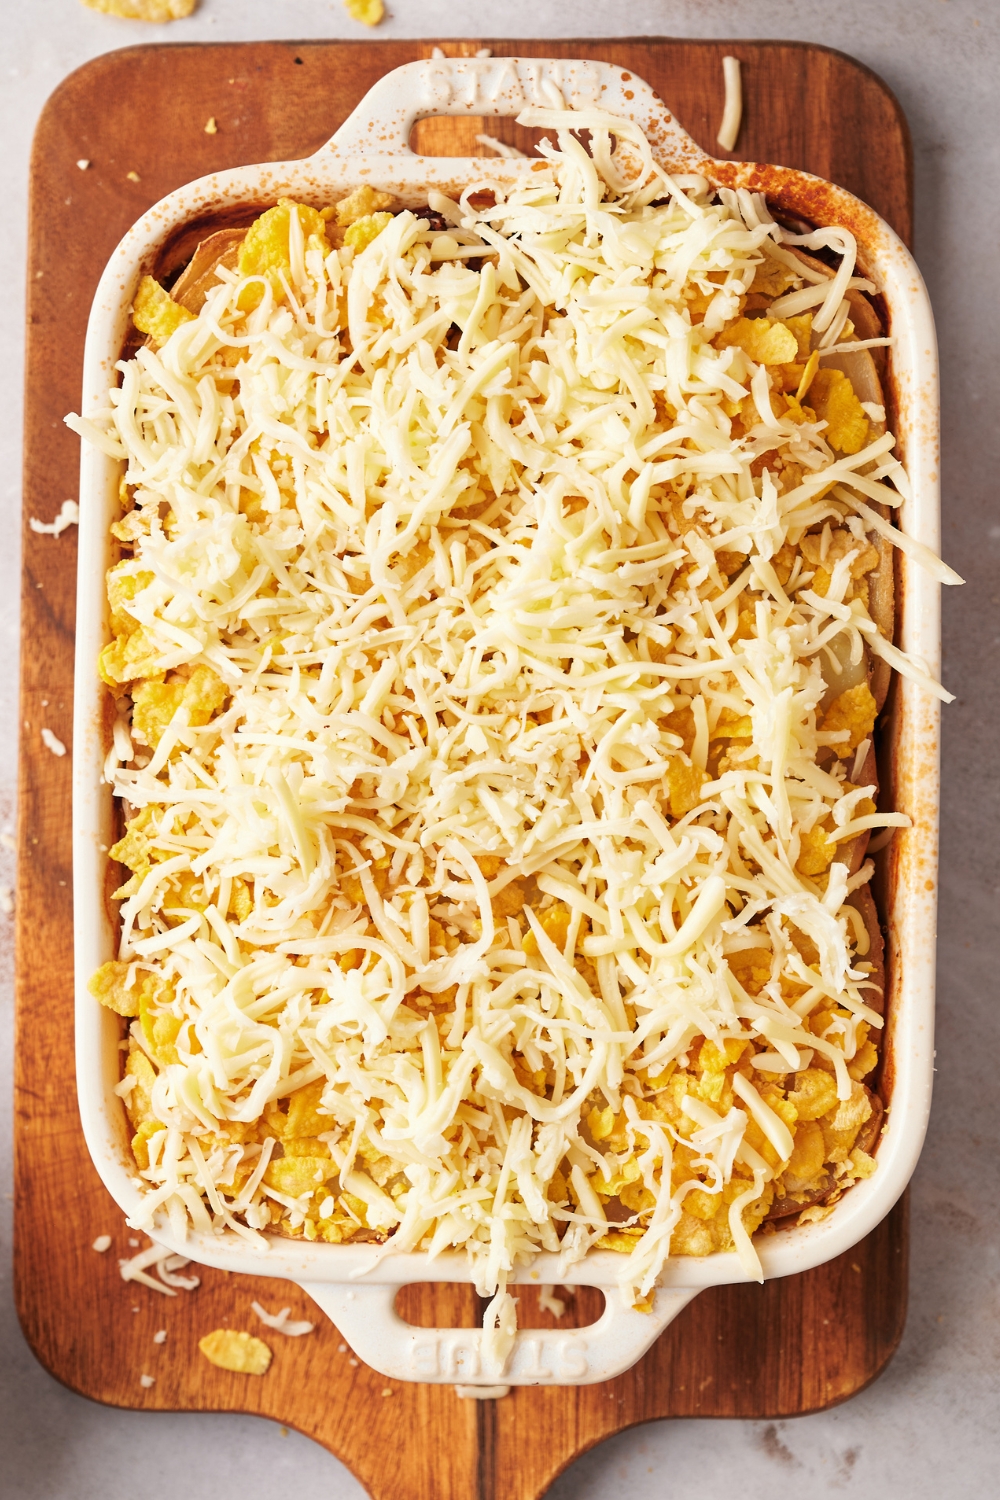 A casserole dish on a wooden serving board with baked shipwreck casserole with grated cheese and crushed cornflakes on top.